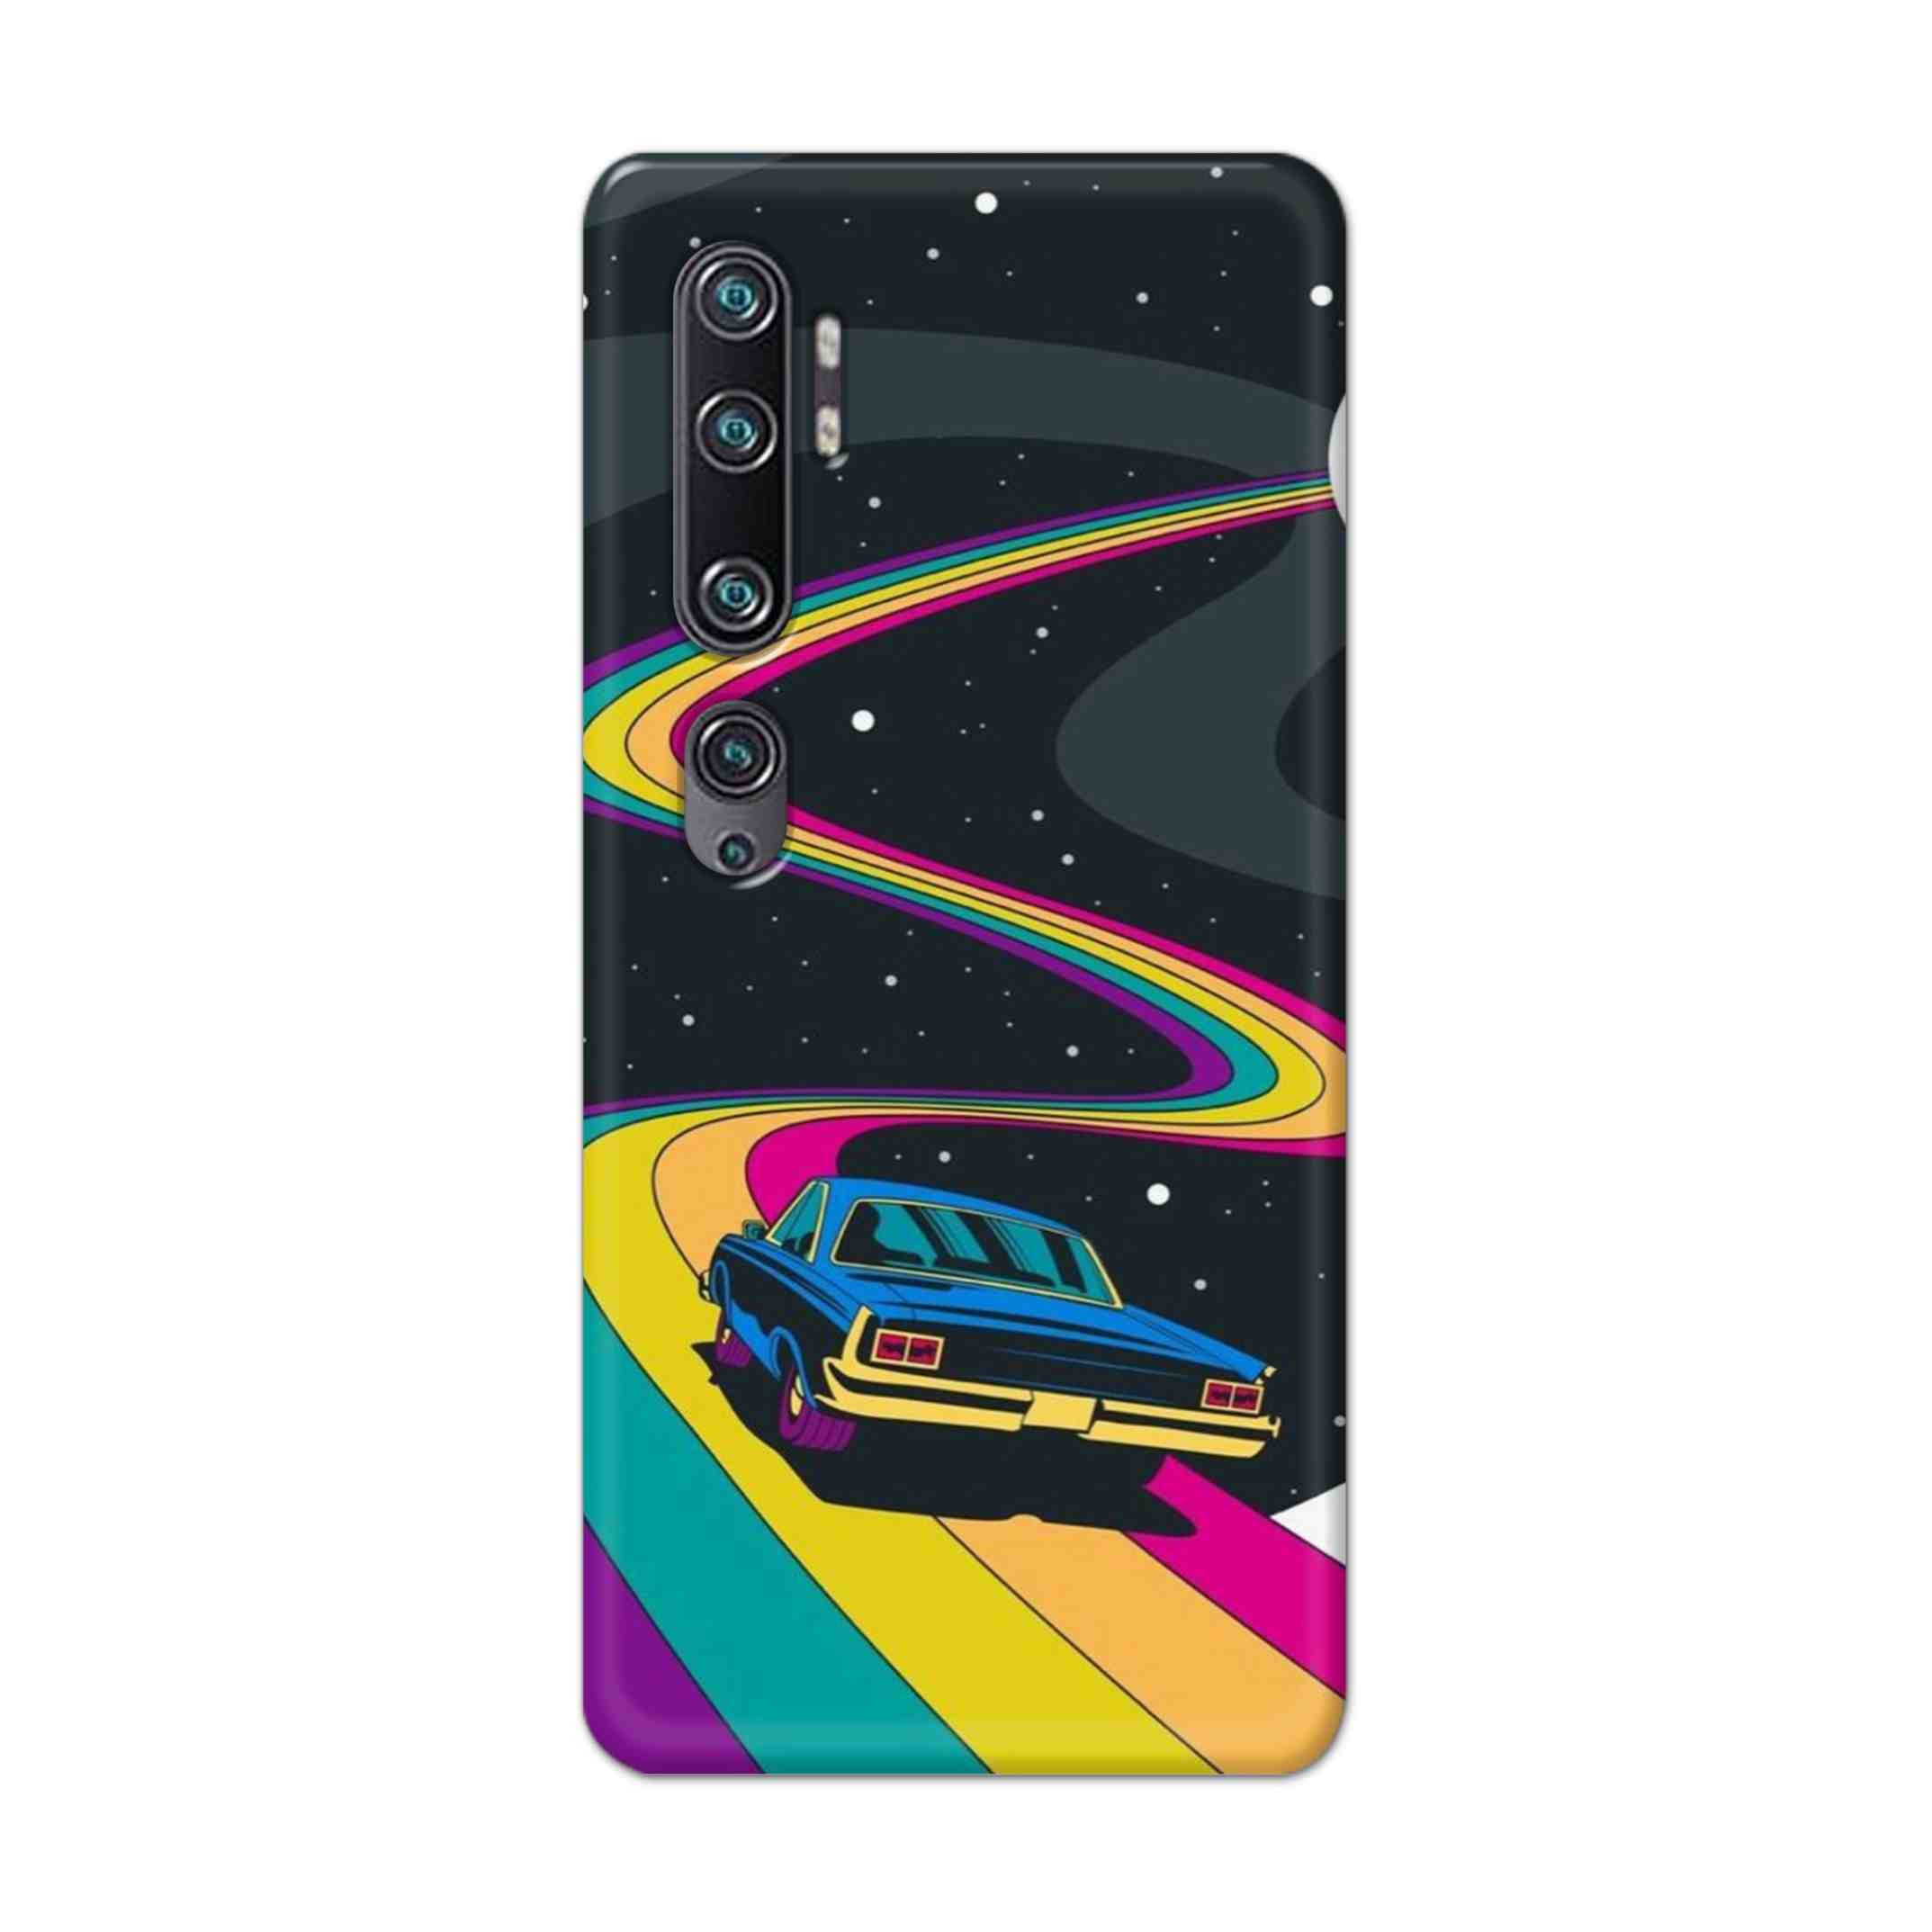 Buy  Neon Car Hard Back Mobile Phone Case Cover For Xiaomi Mi Note 10 Online